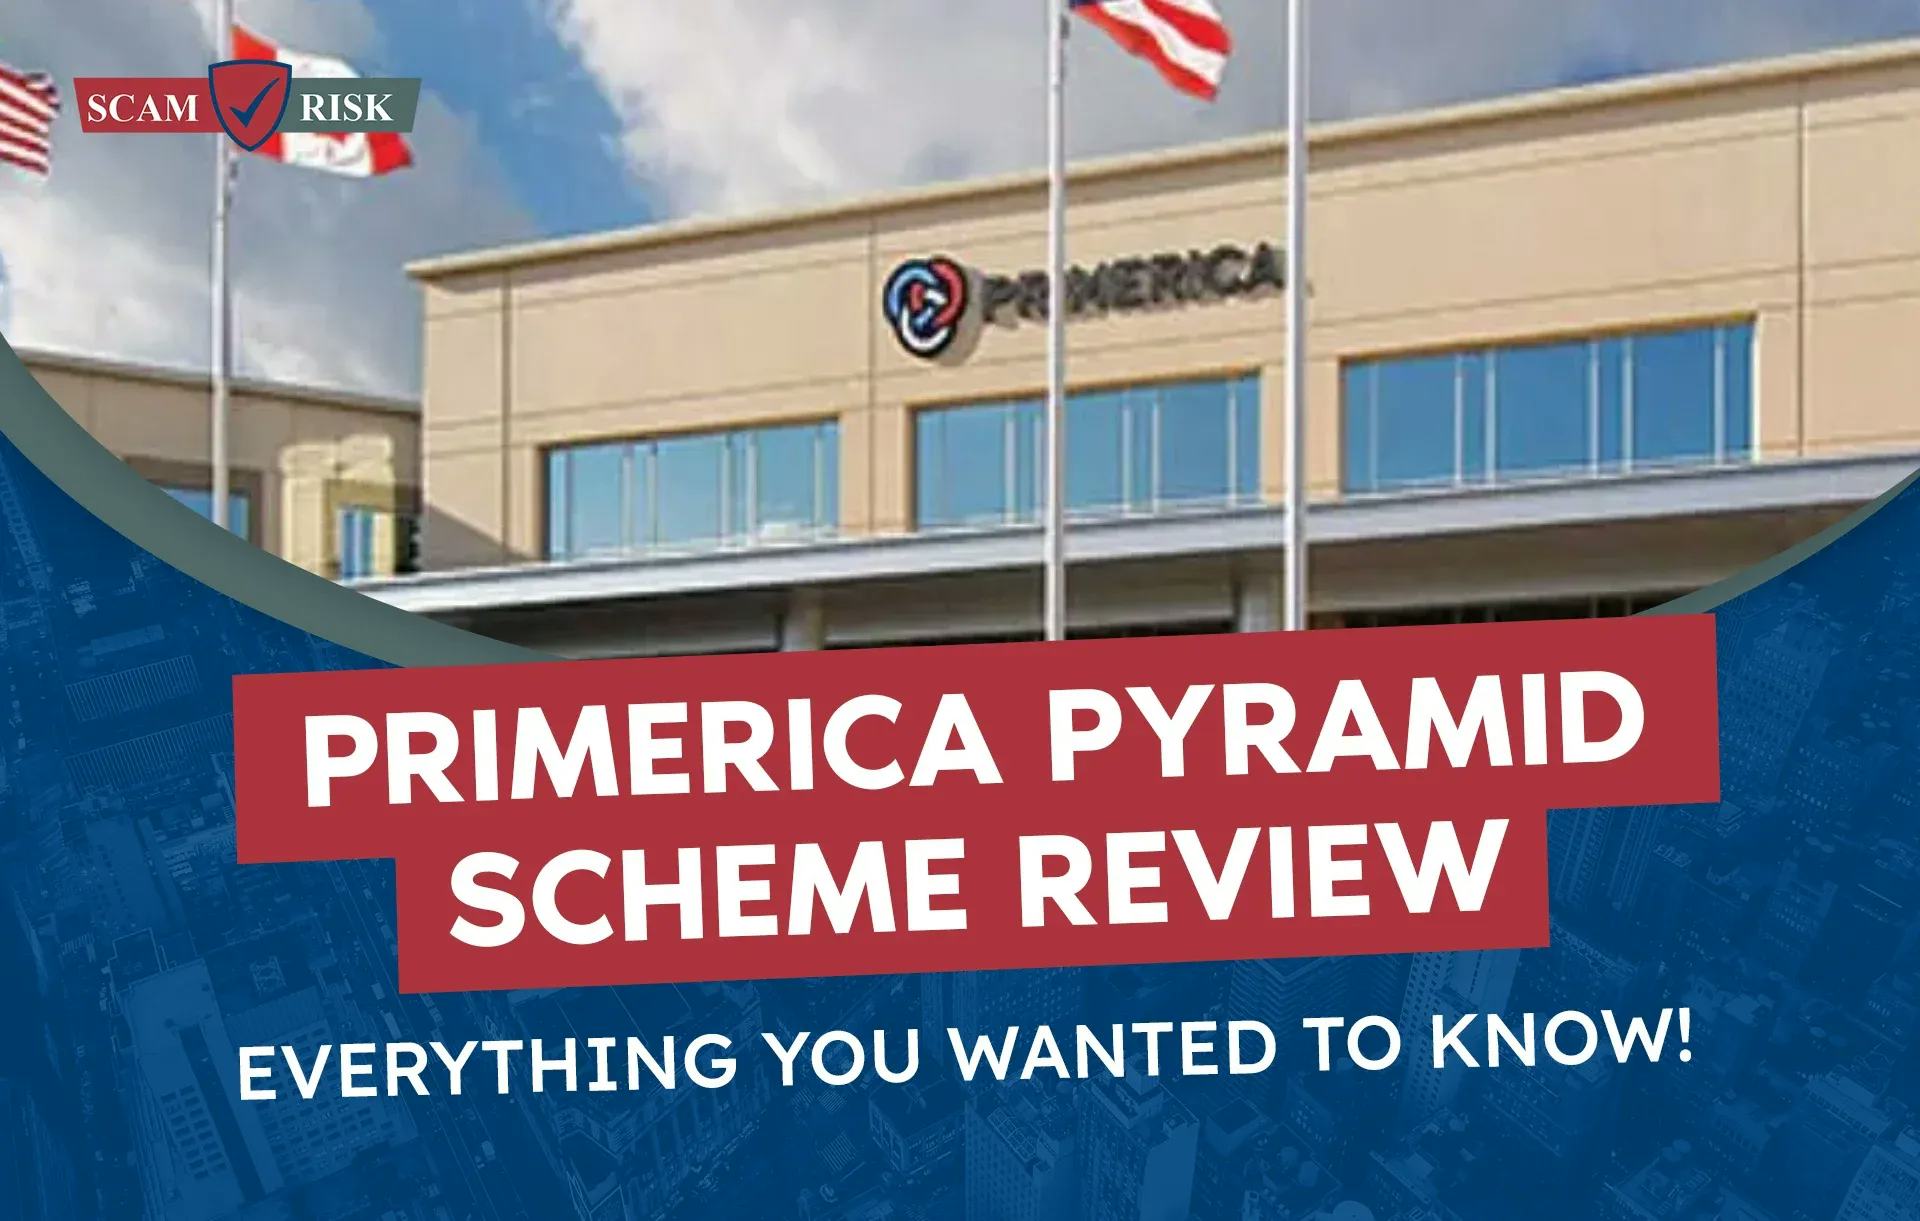 Primerica Pyramid Scheme Review ([year] Update): Everything You Wanted To Know!